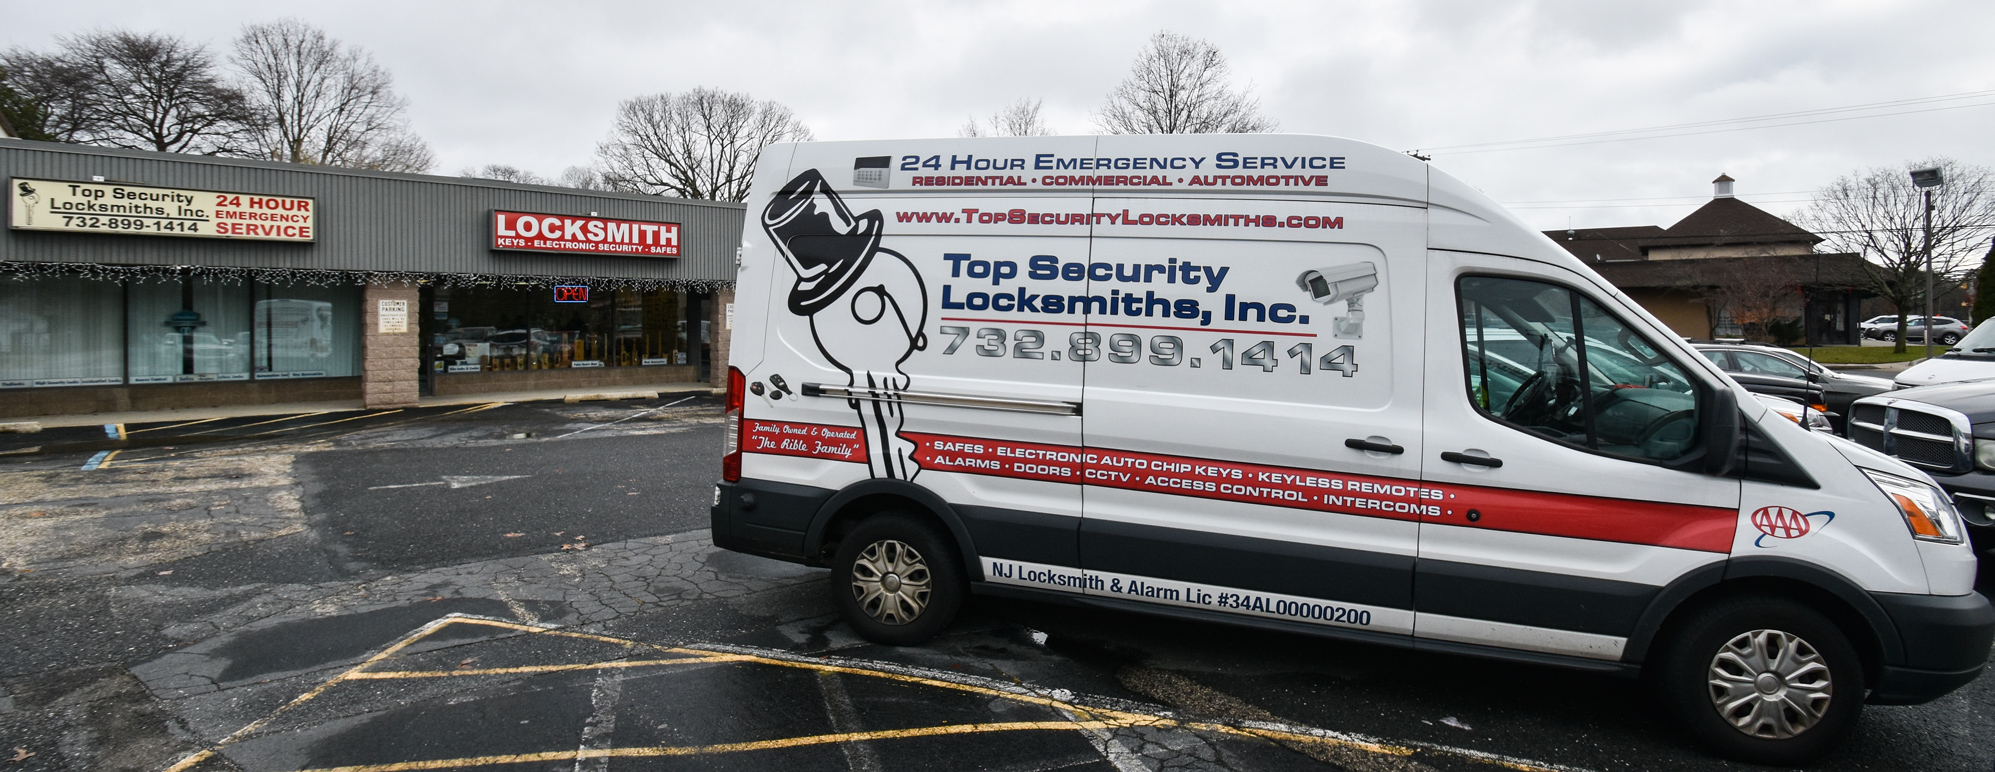 Emergency mobile service in Wall, NJ - An equipped van with all the tools, equipment, parts, and hardware necessary to handle your locksmith or security challenges.